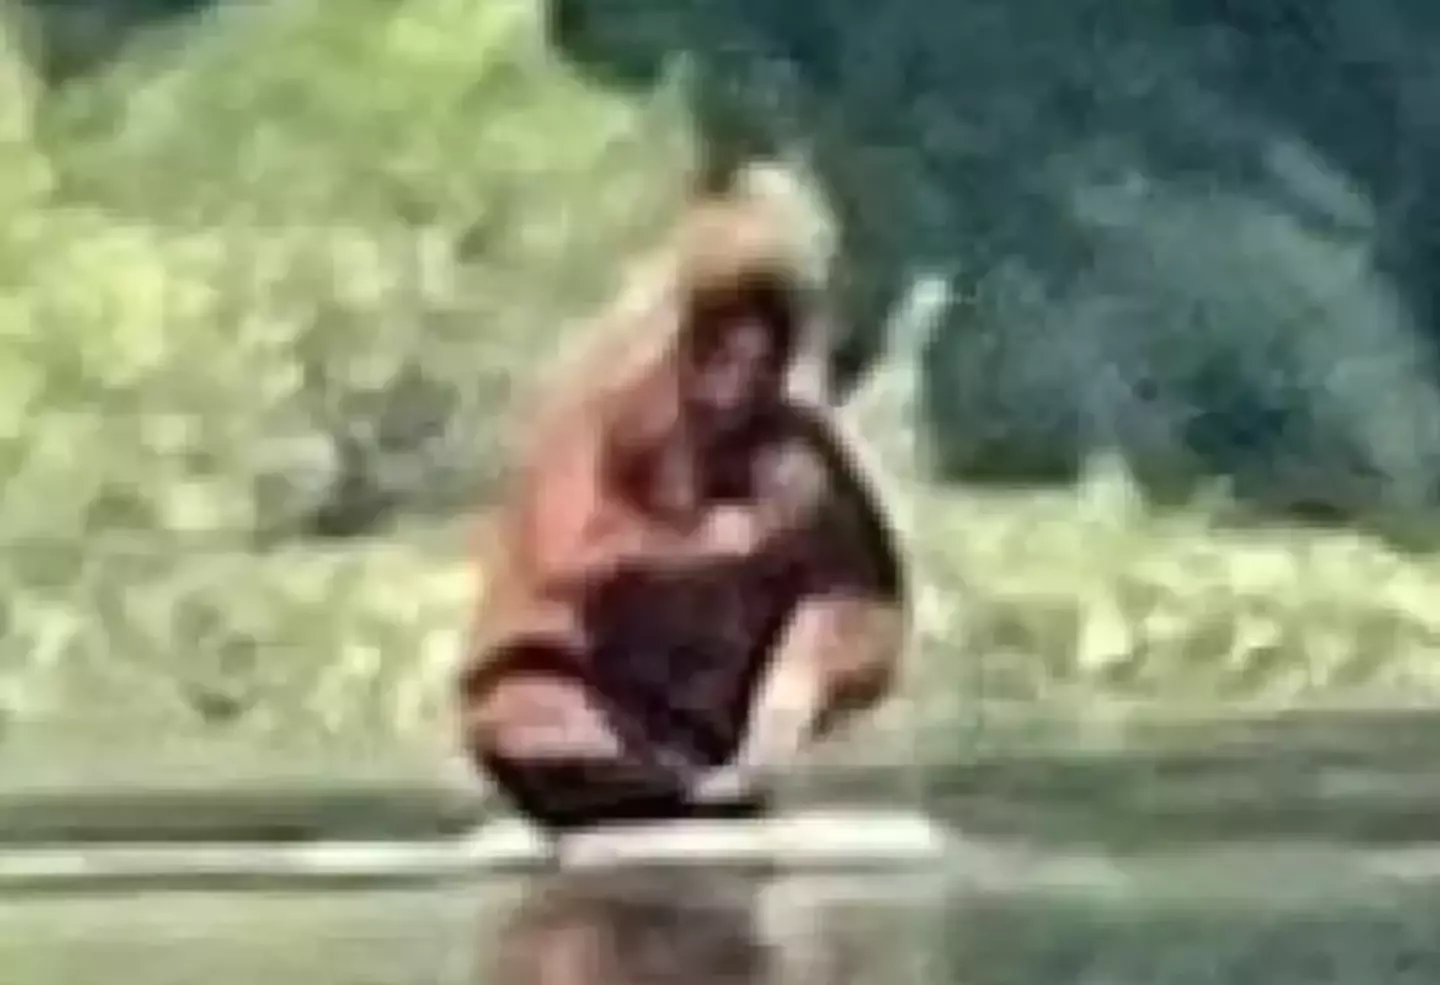 What do you make of this potential Bigfoot sighting?